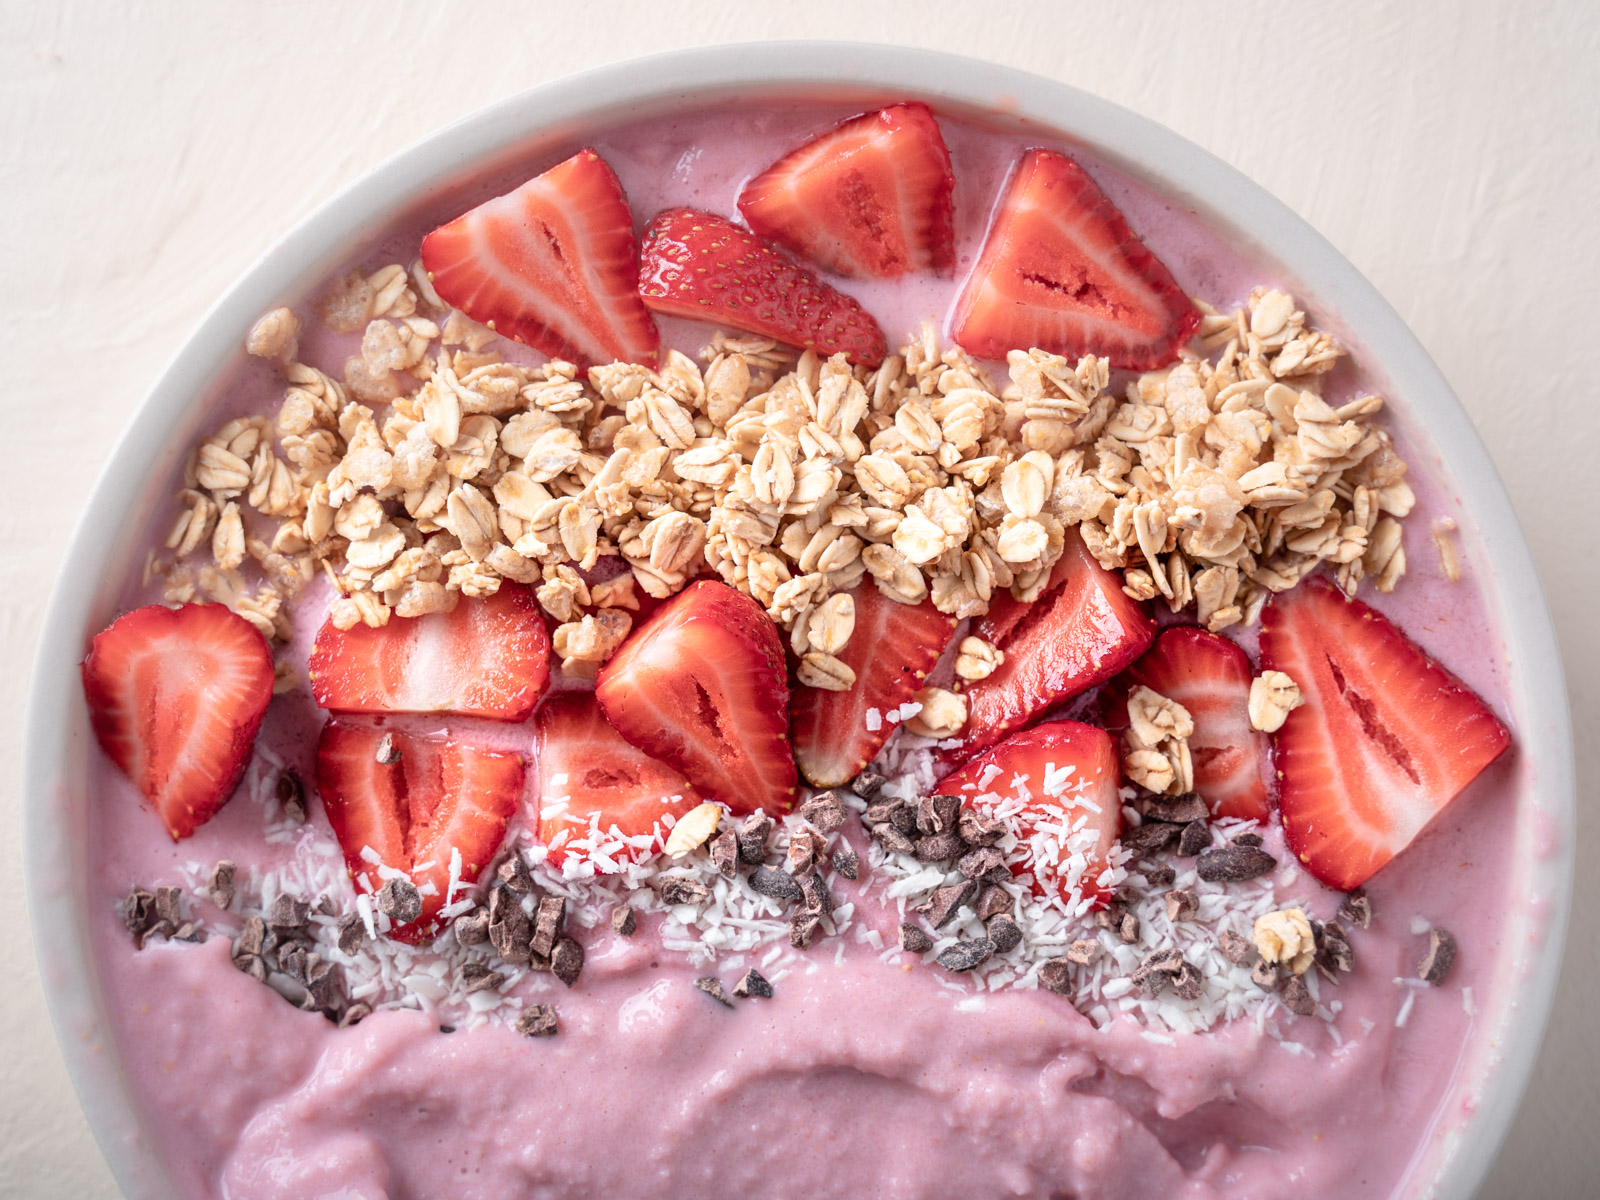 Close up of the strawberry smoothie bowl with toppings. The smoothie base is light pink and the toppings include cocoa nibs, coconut flakes, sliced strawberries, and granola.